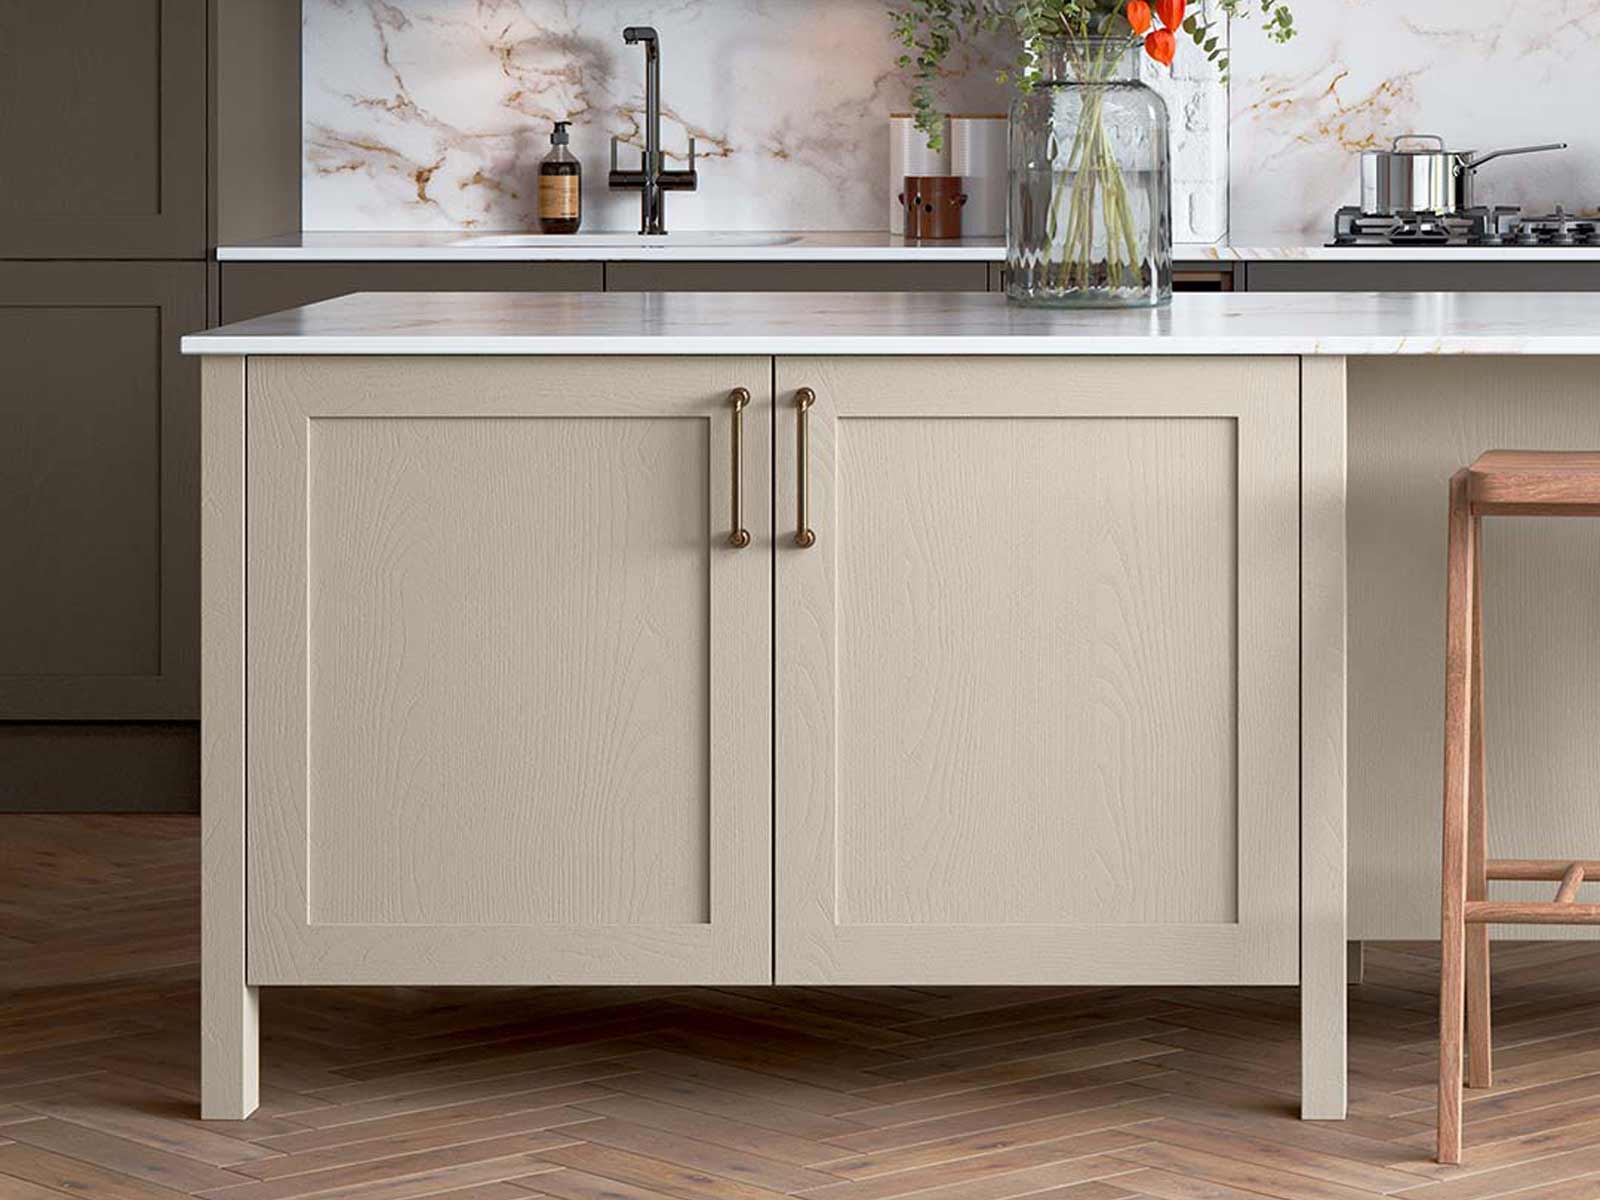 A light brown Shaker kitchen island with a white worktop and bronze D handles